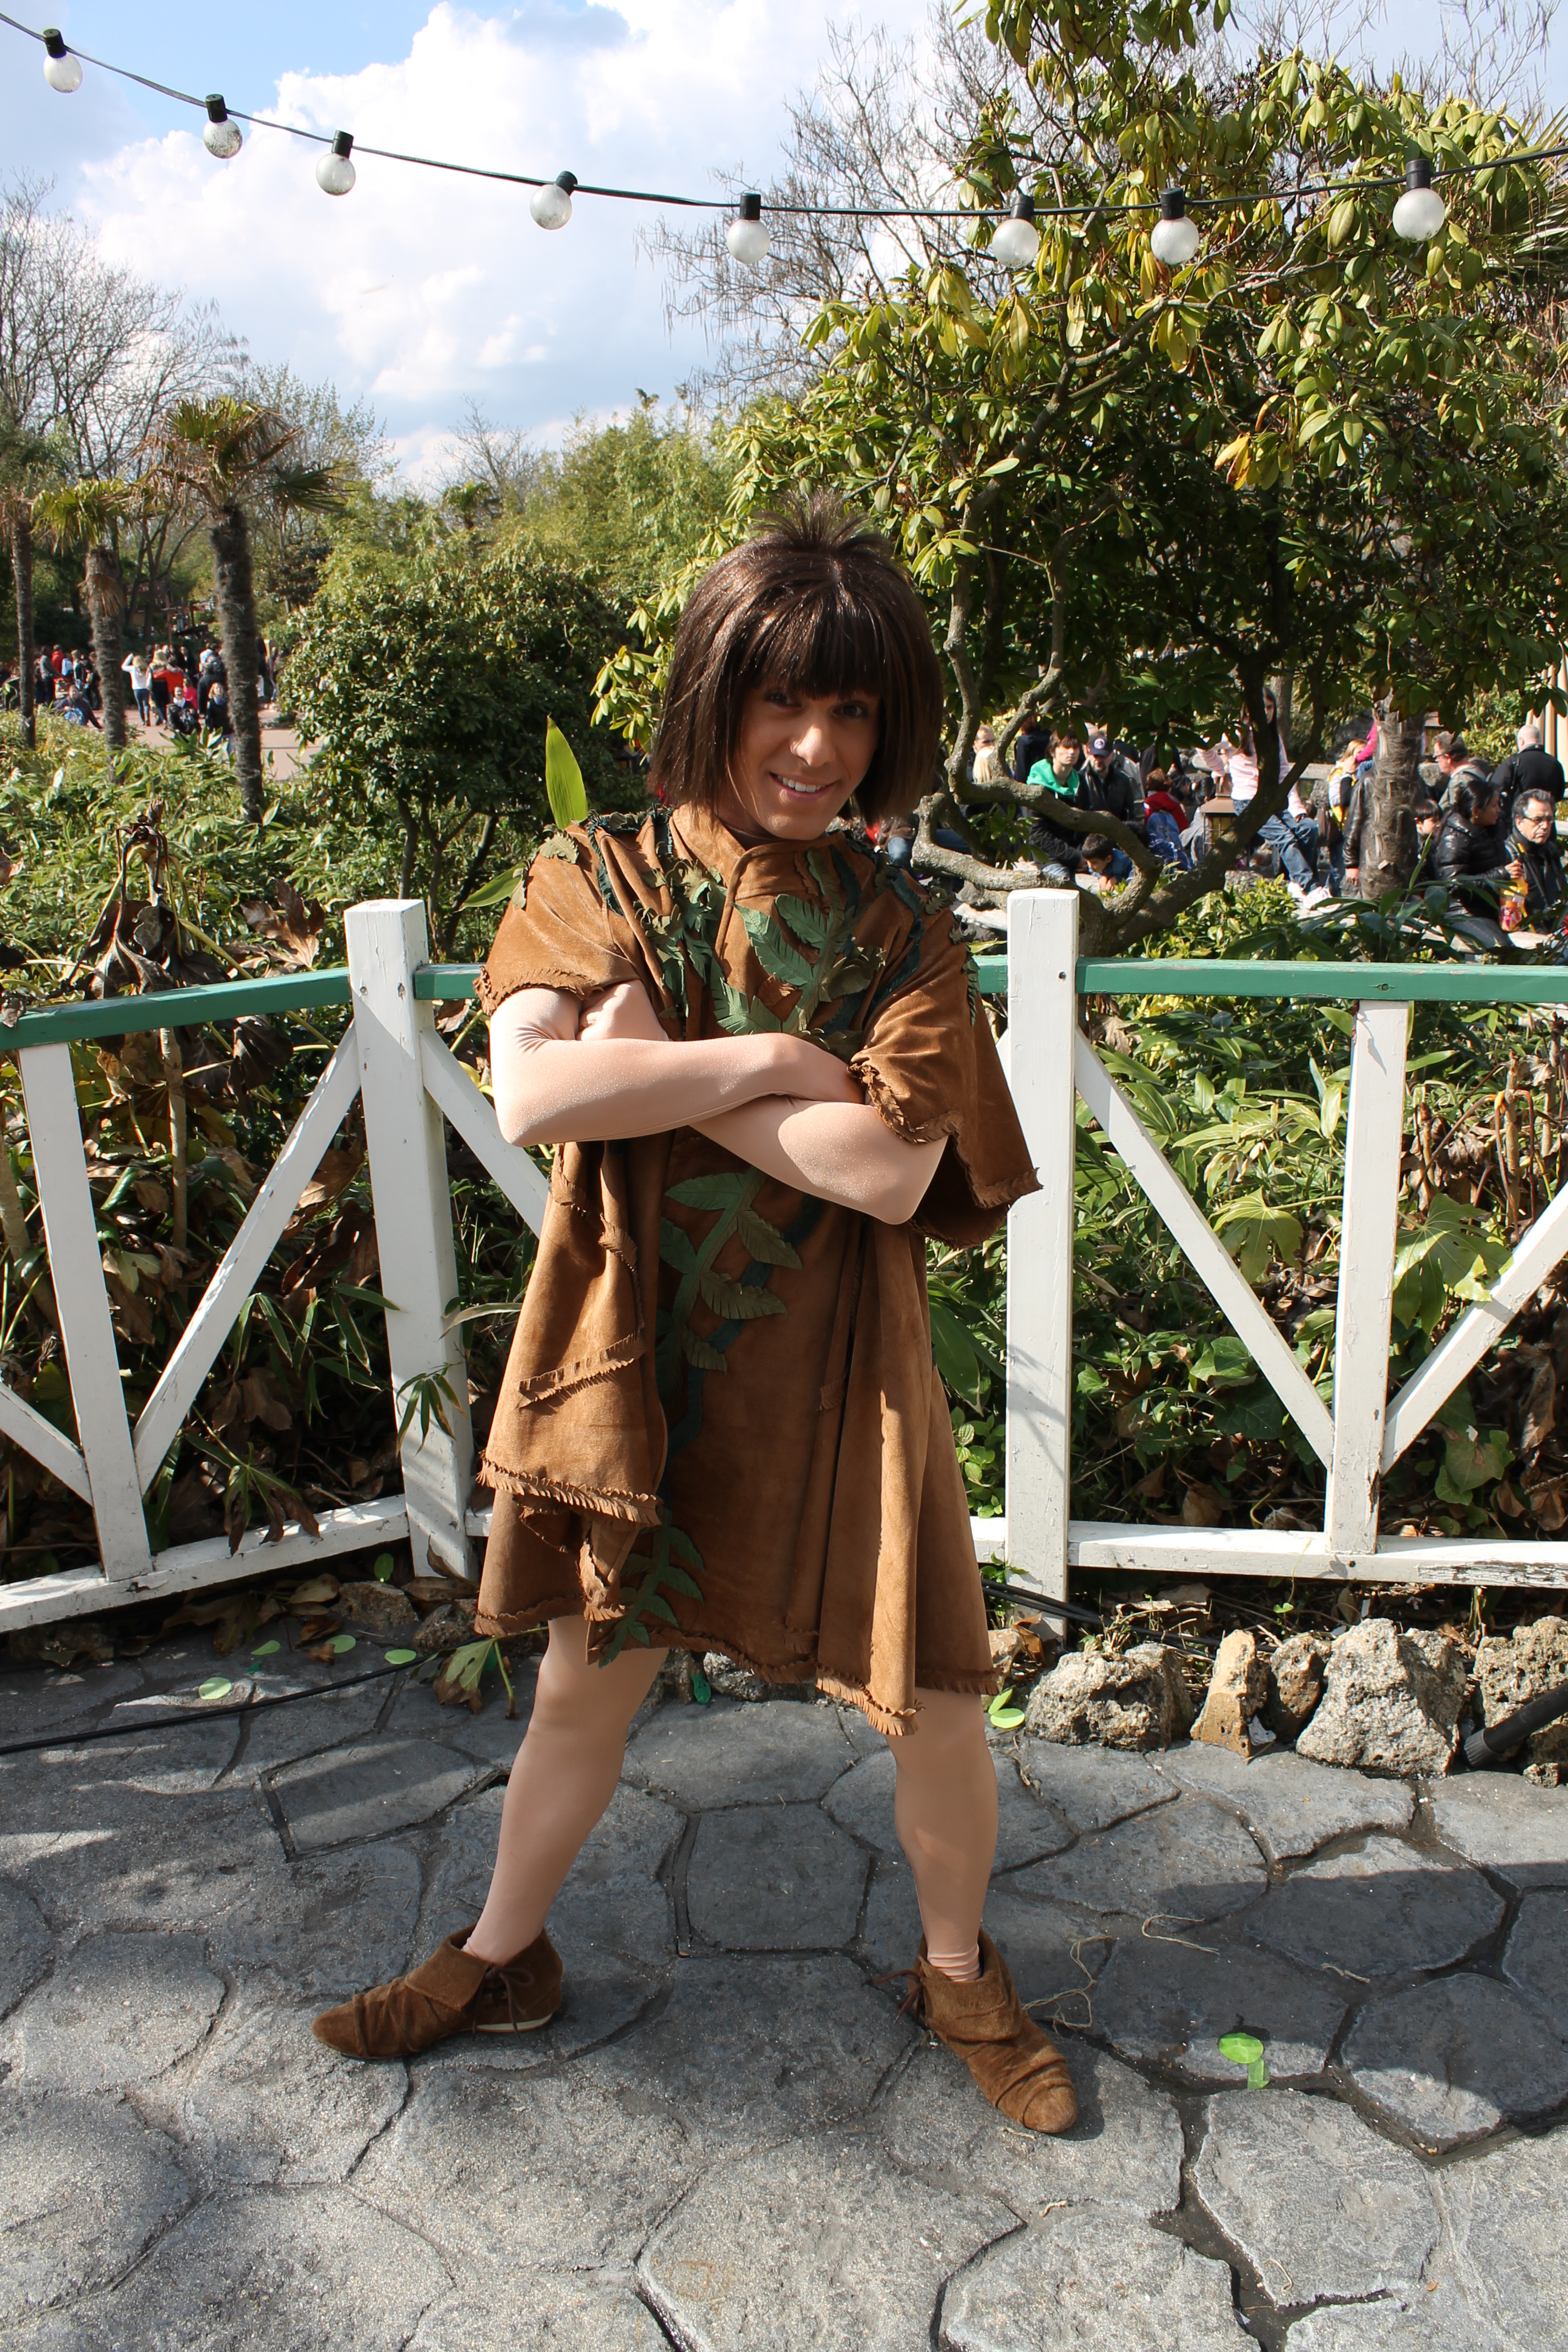 Mowgli made a rare appereance after a small show with him in it on April 12th 2012, you can't find him normally at the Parks